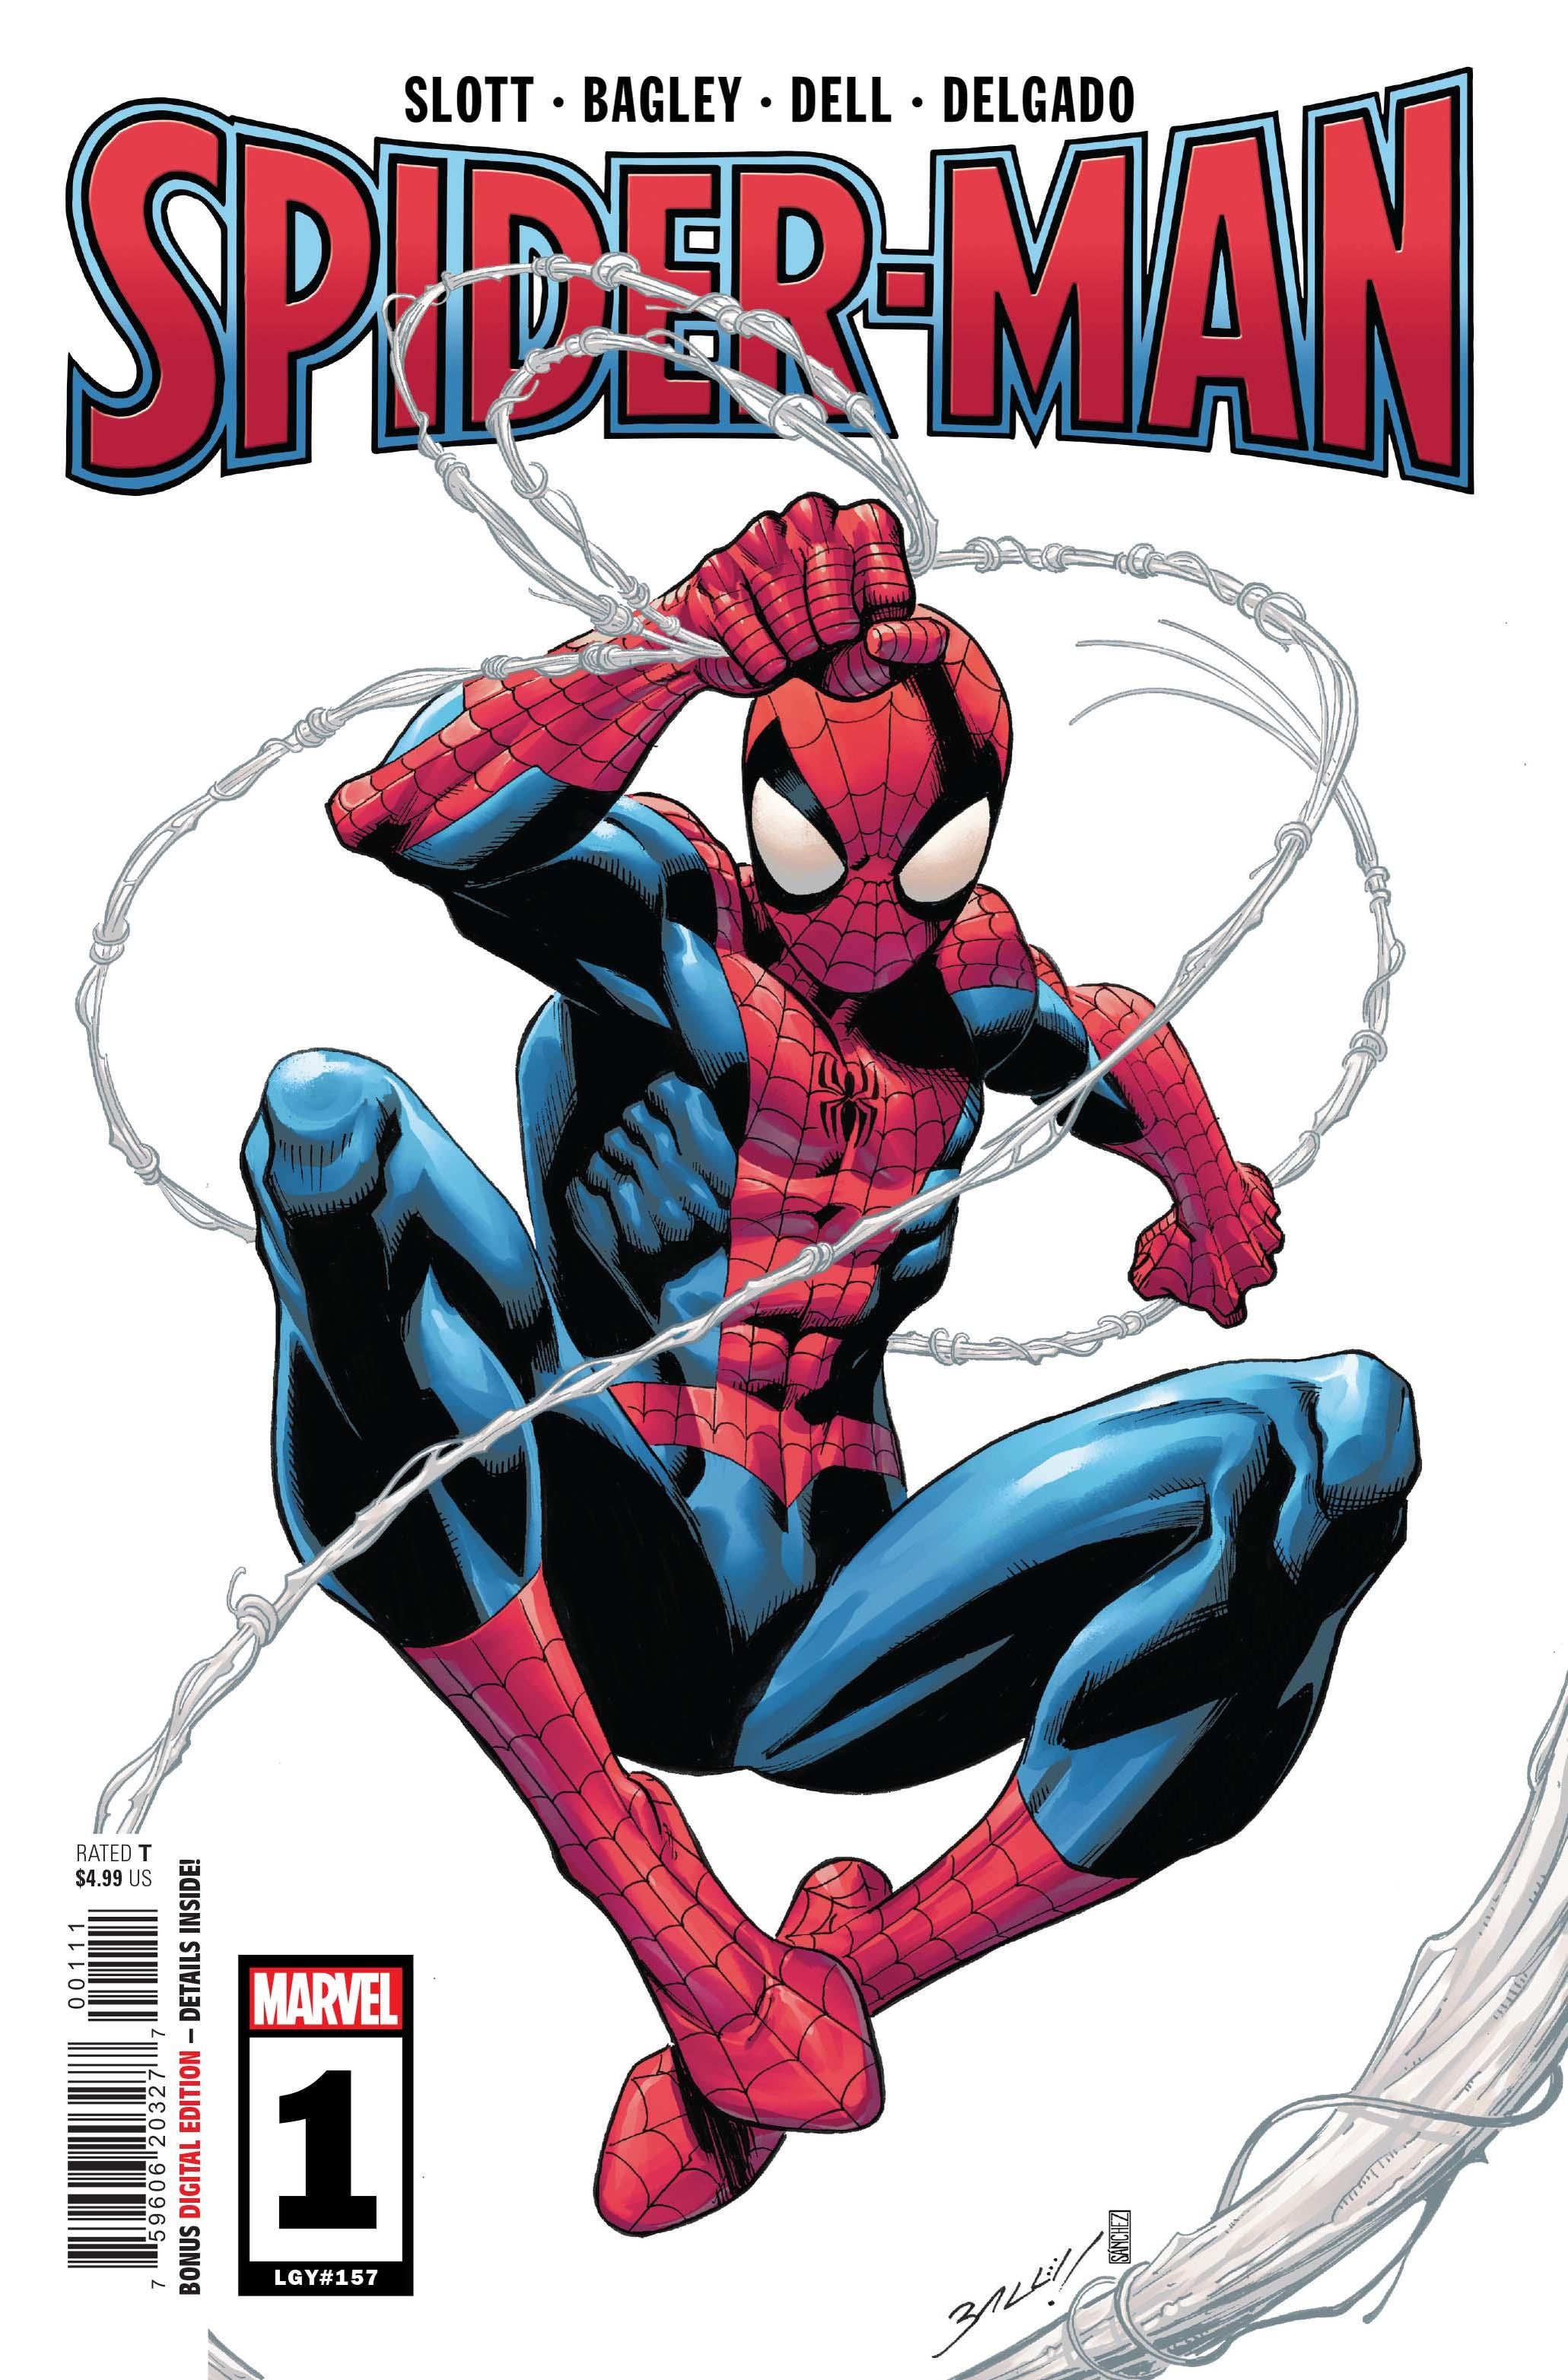 Spider-Man (Exclusive) Preview of #1 End Begins in Spider-Verse the